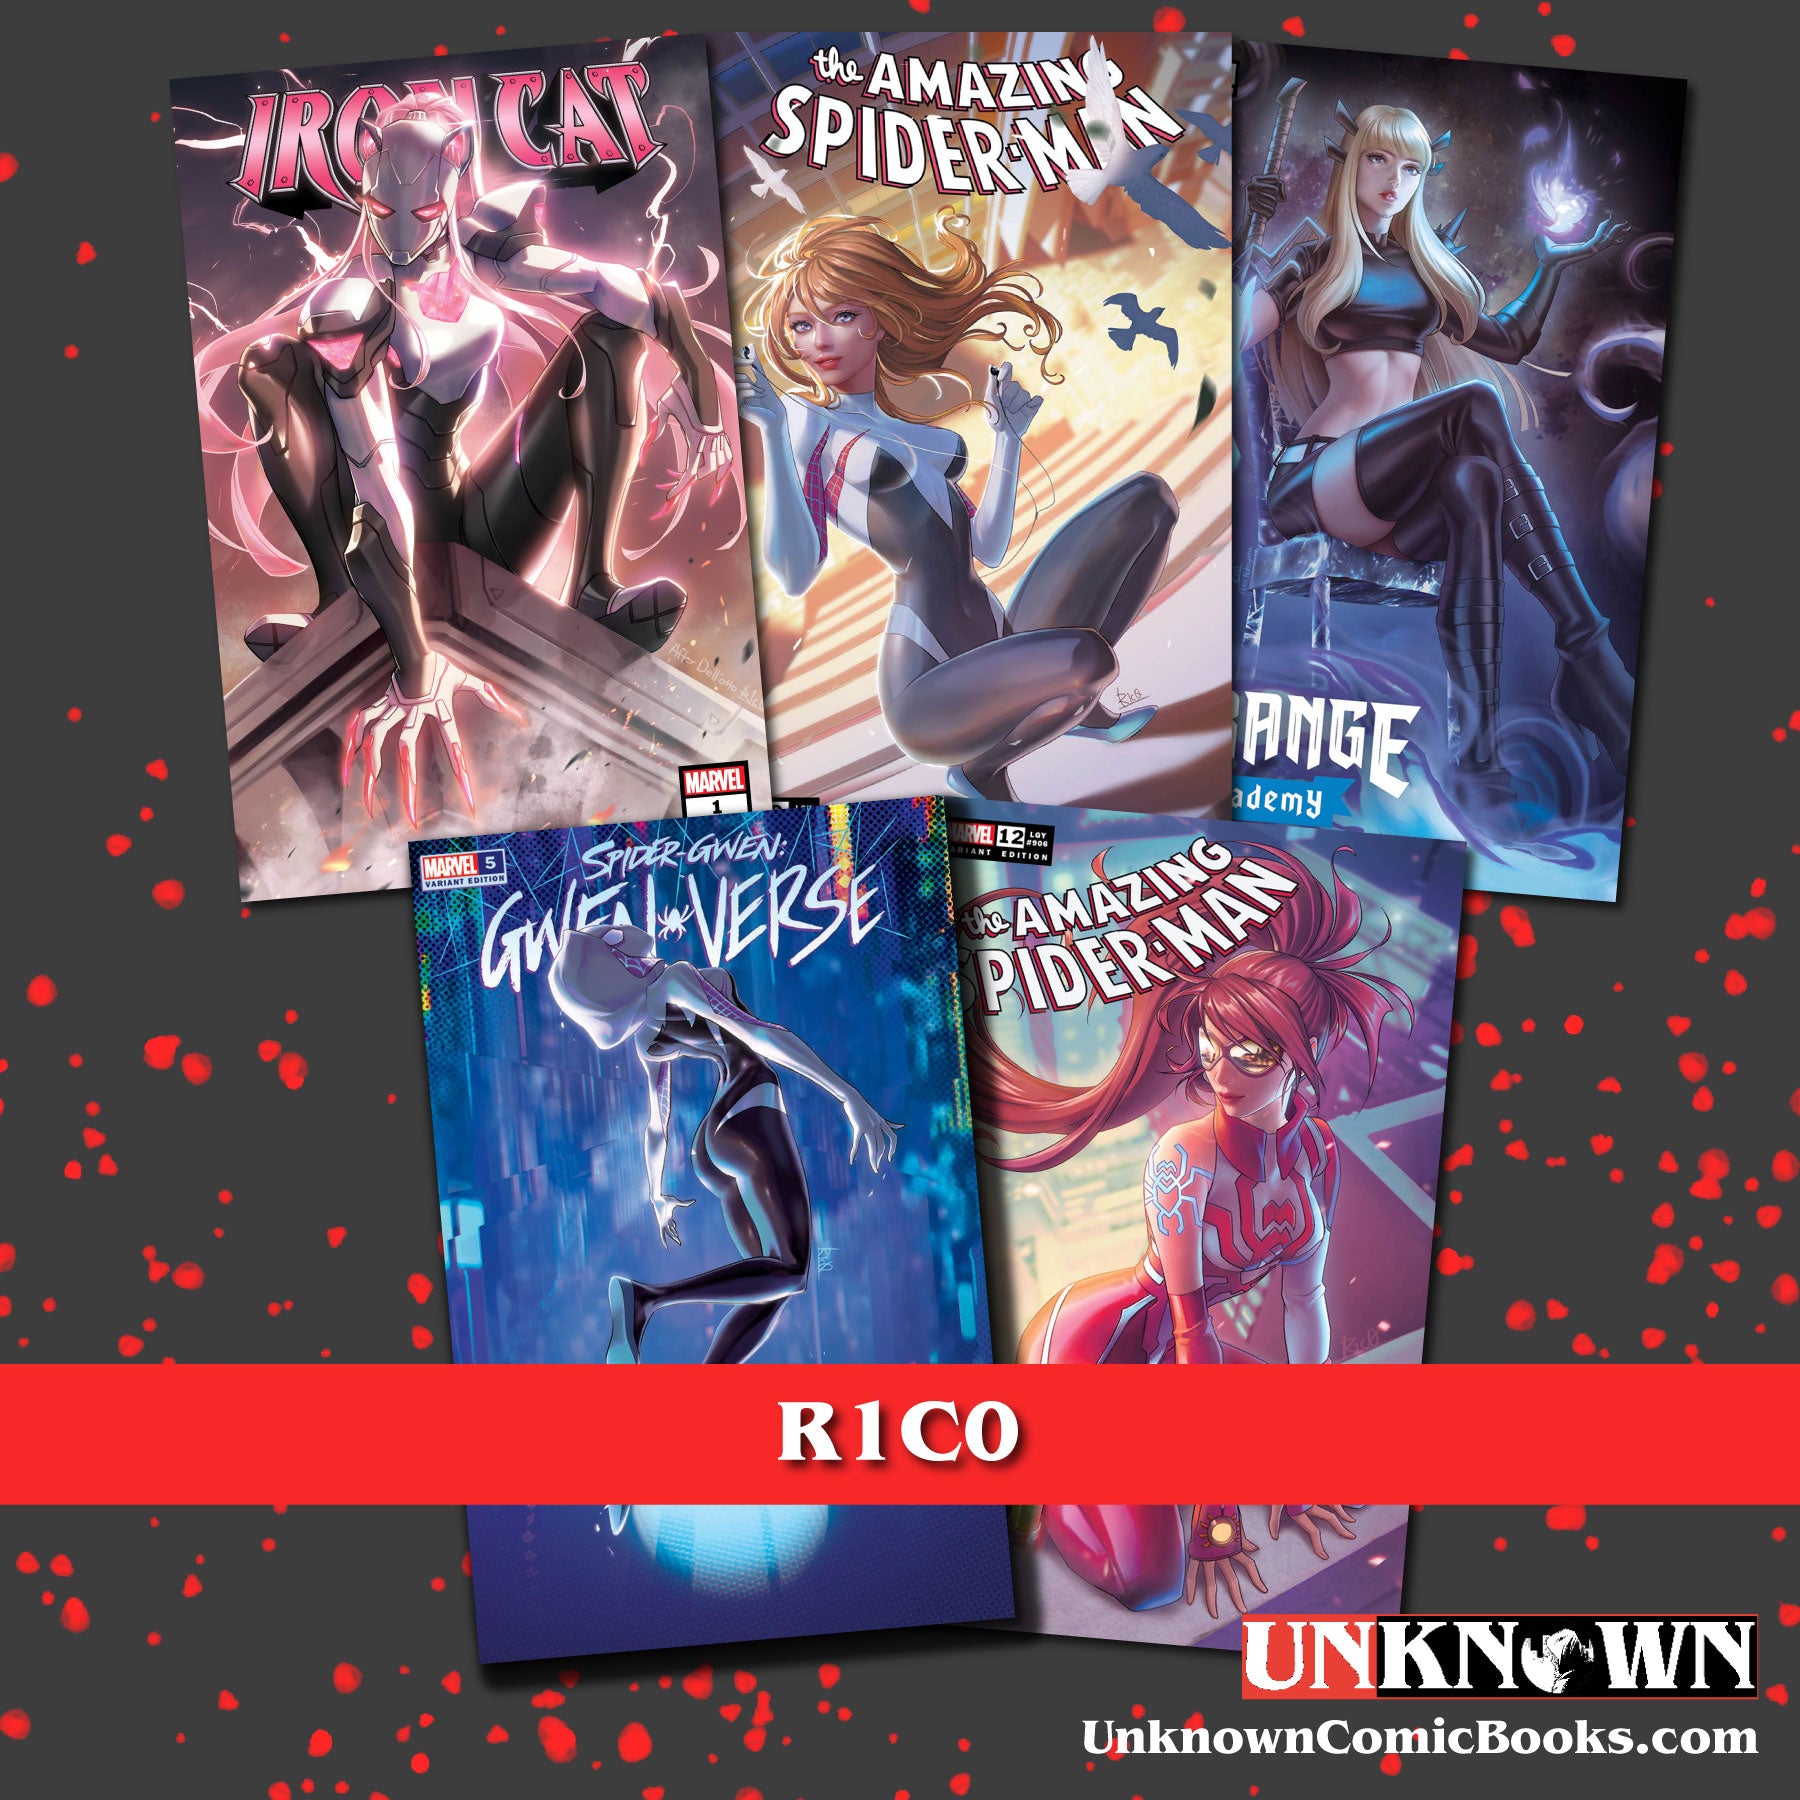 [5 PACK] UNKNOWN COMICS MYSTERY THEMED 👉🎨R1C0 ARTIST EXCLUSIVE BOX 👉TRADE (12/21/2022)